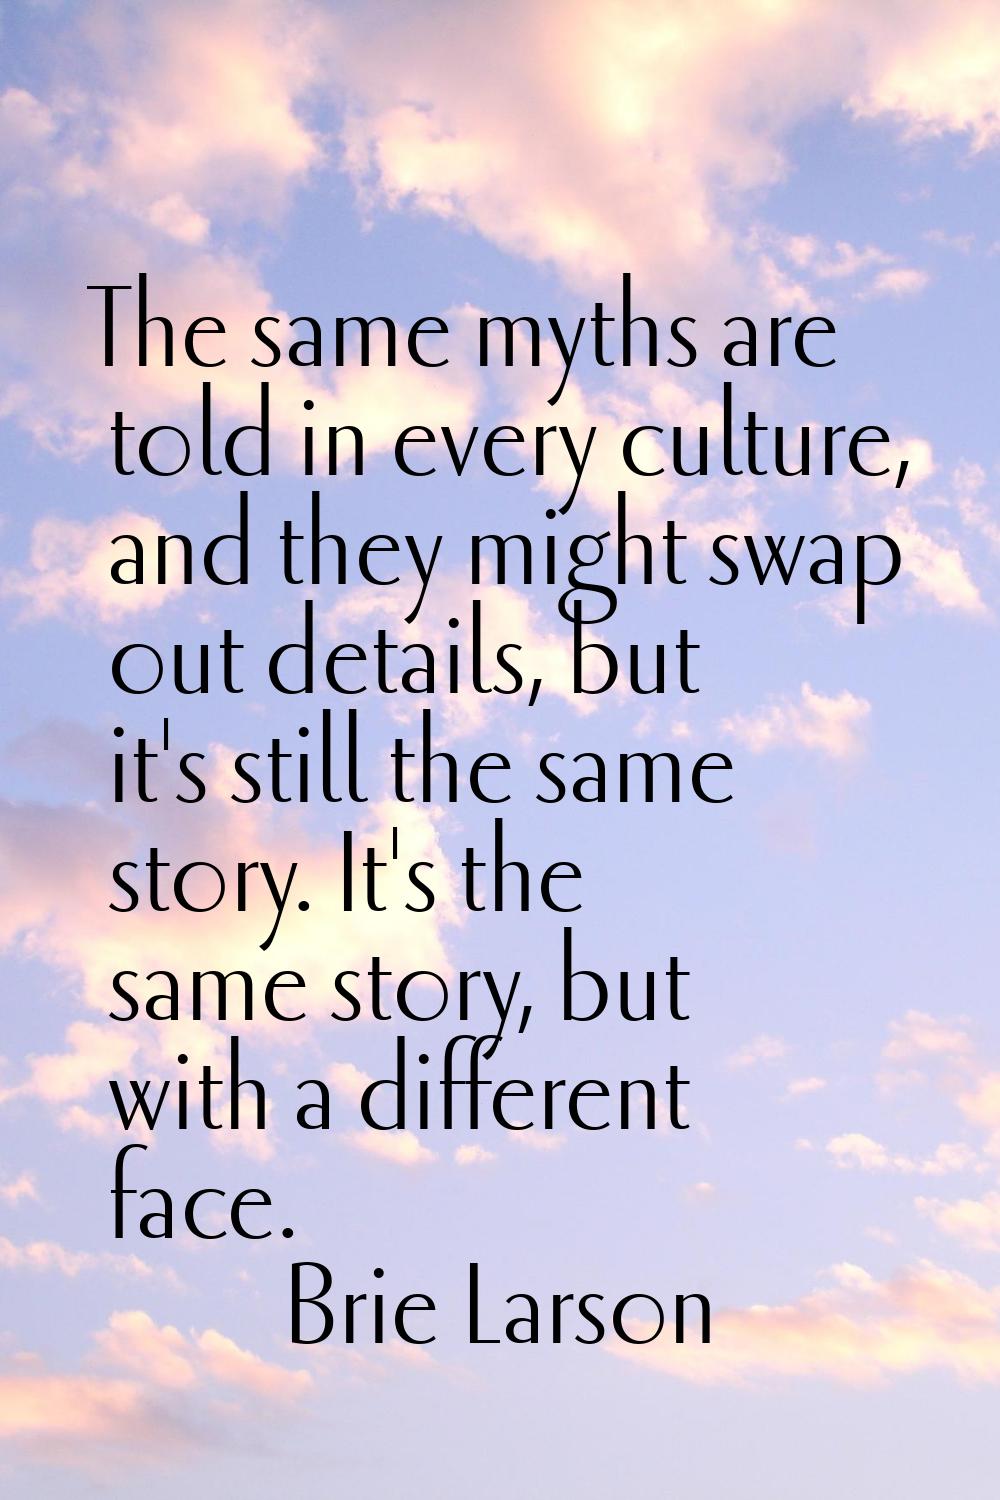 The same myths are told in every culture, and they might swap out details, but it's still the same 